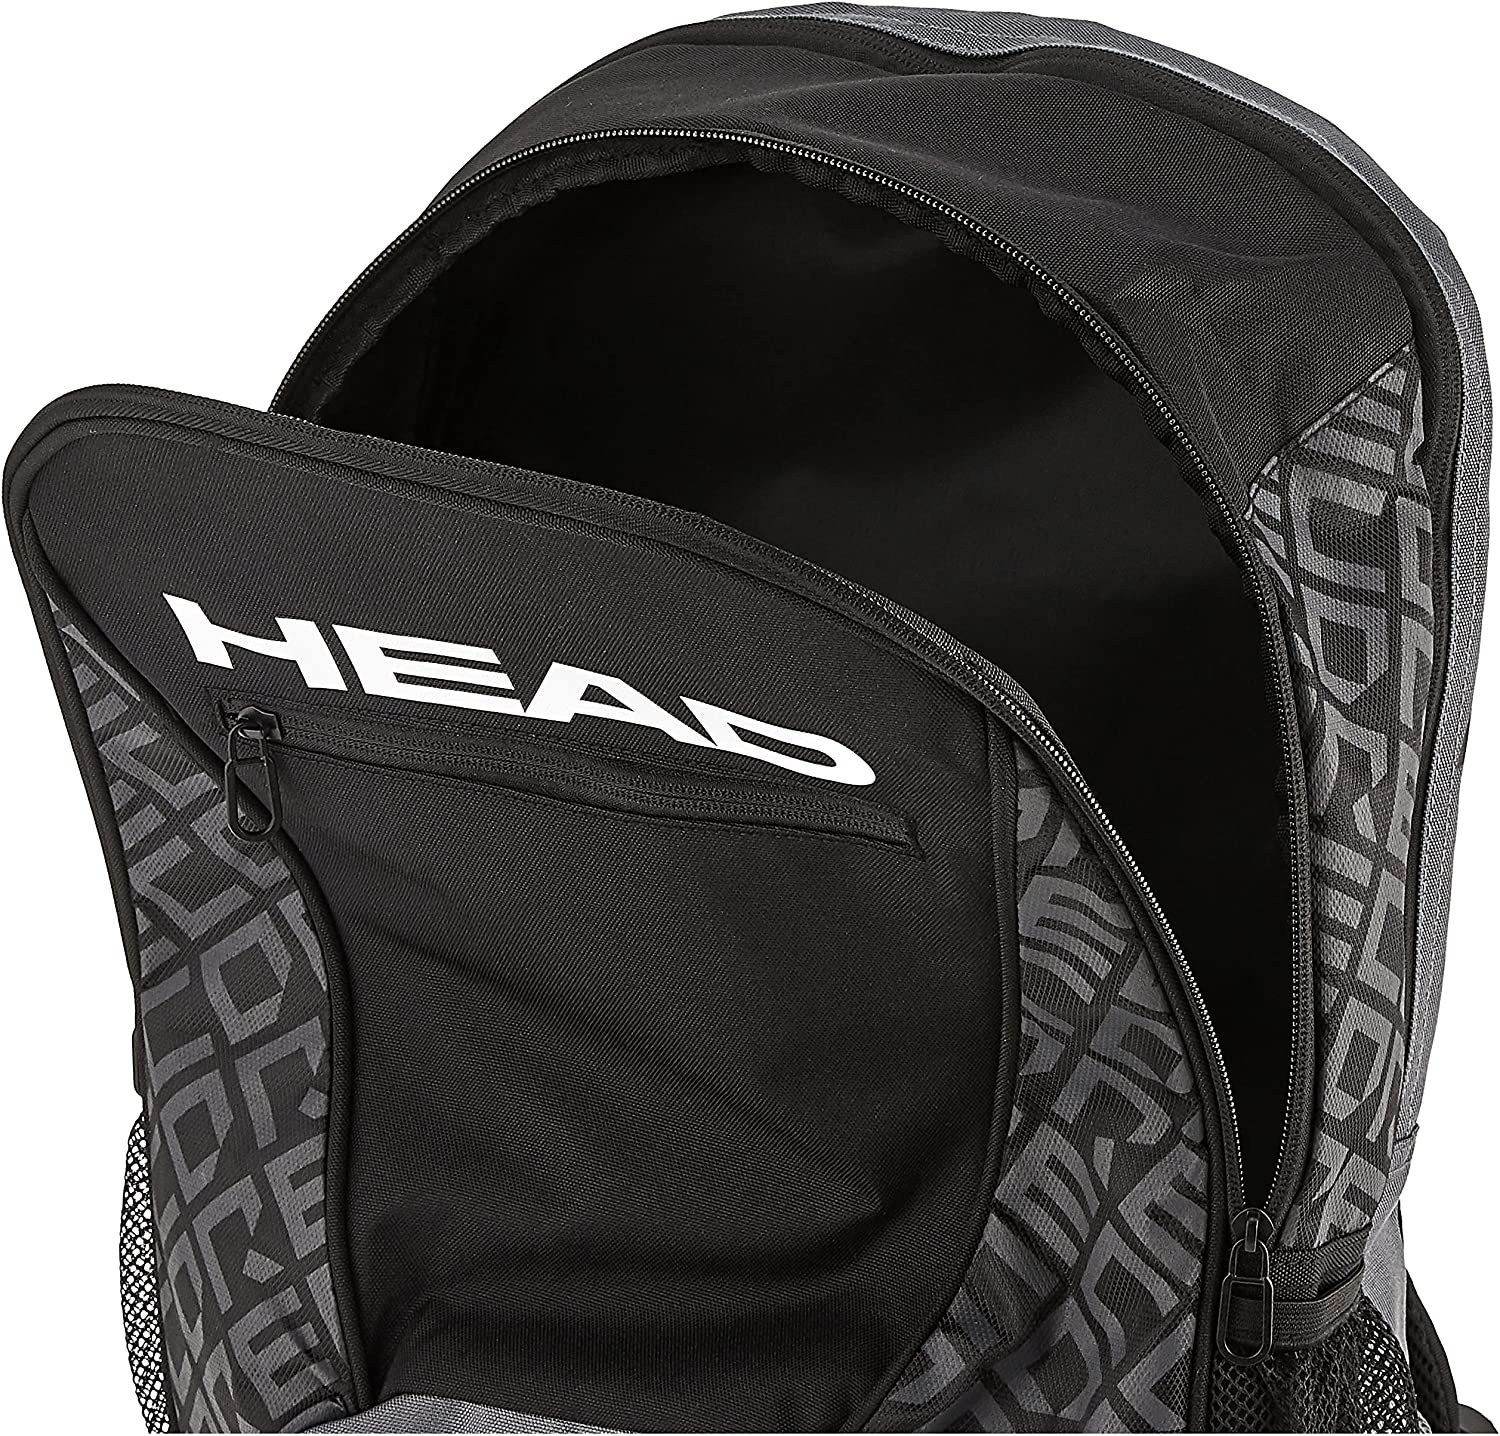 HEAD Gray and Black Tennis Sports Equipment Backpack - image 5 of 6